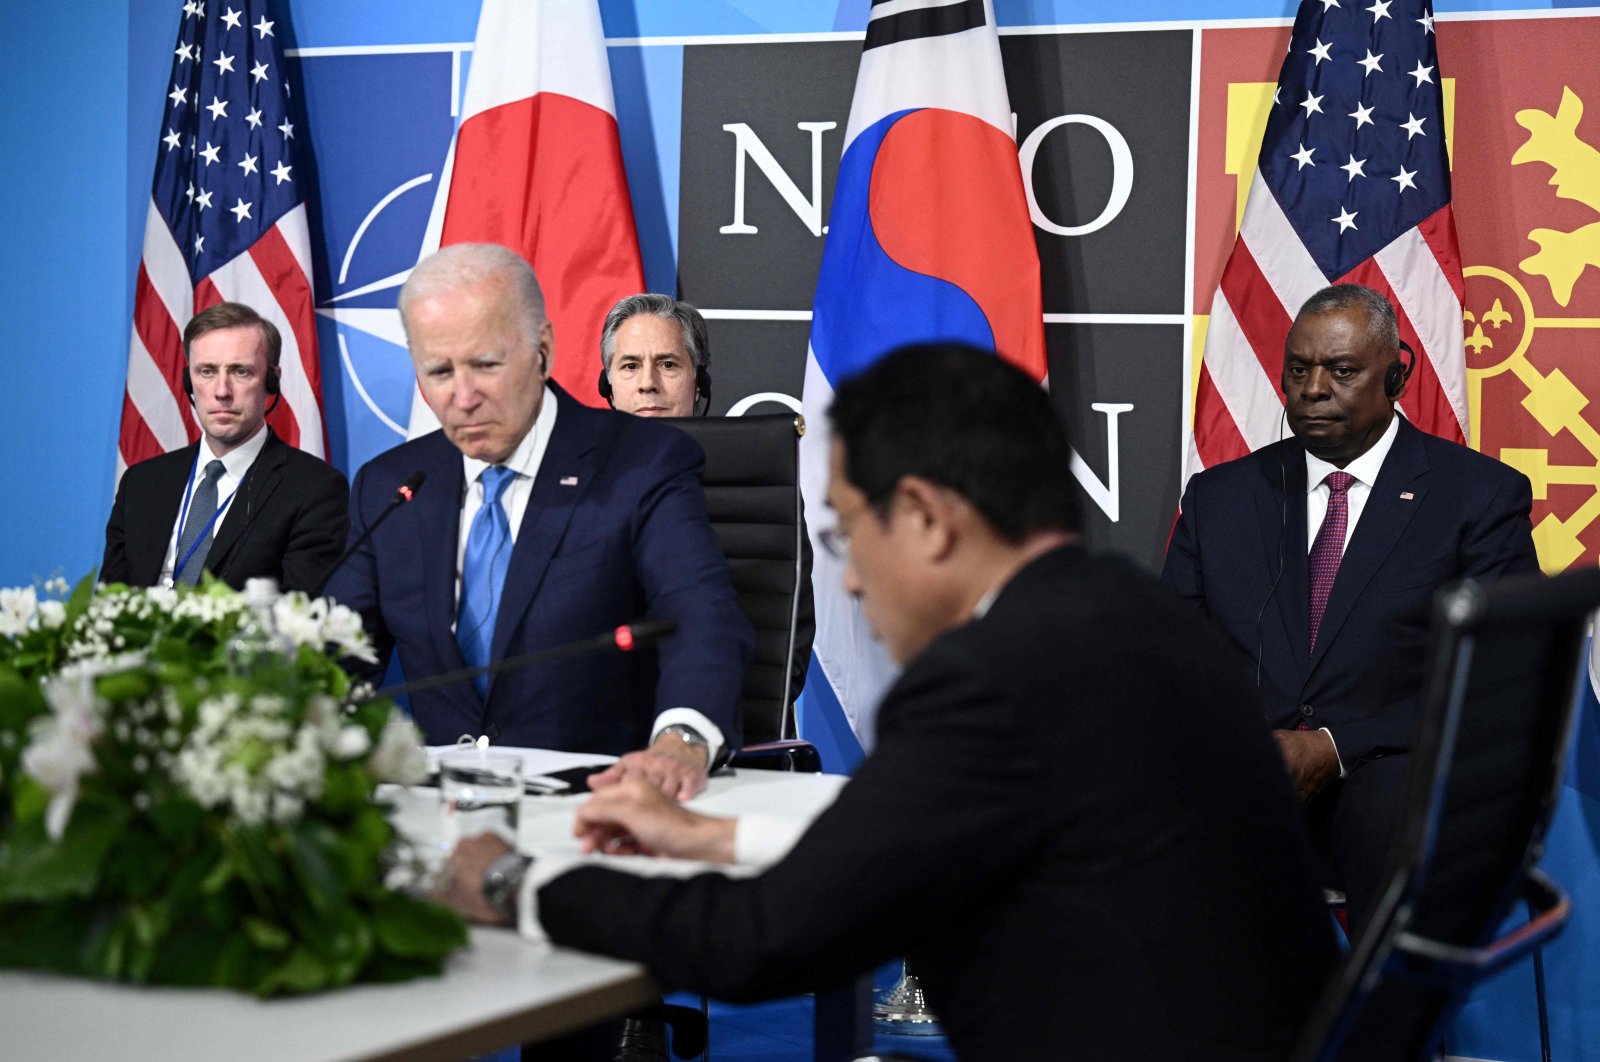 U.S. President Joe Biden (2L) flanked by U.S. Secretary of Defense Lloyd Austin (R), Secretary of State Antony Blinken (2L) and U.S. National Security Advisor Jake Sullivan (L) sits with Japan&#039;s Prime Minister Fumio Kishida (2R) and South Korea&#039;s President during a trilateral meeting on the sidelines of the NATO summit at the Ifema congress center, Madrid, Spain, June 29, 2022. (AFP Photo)